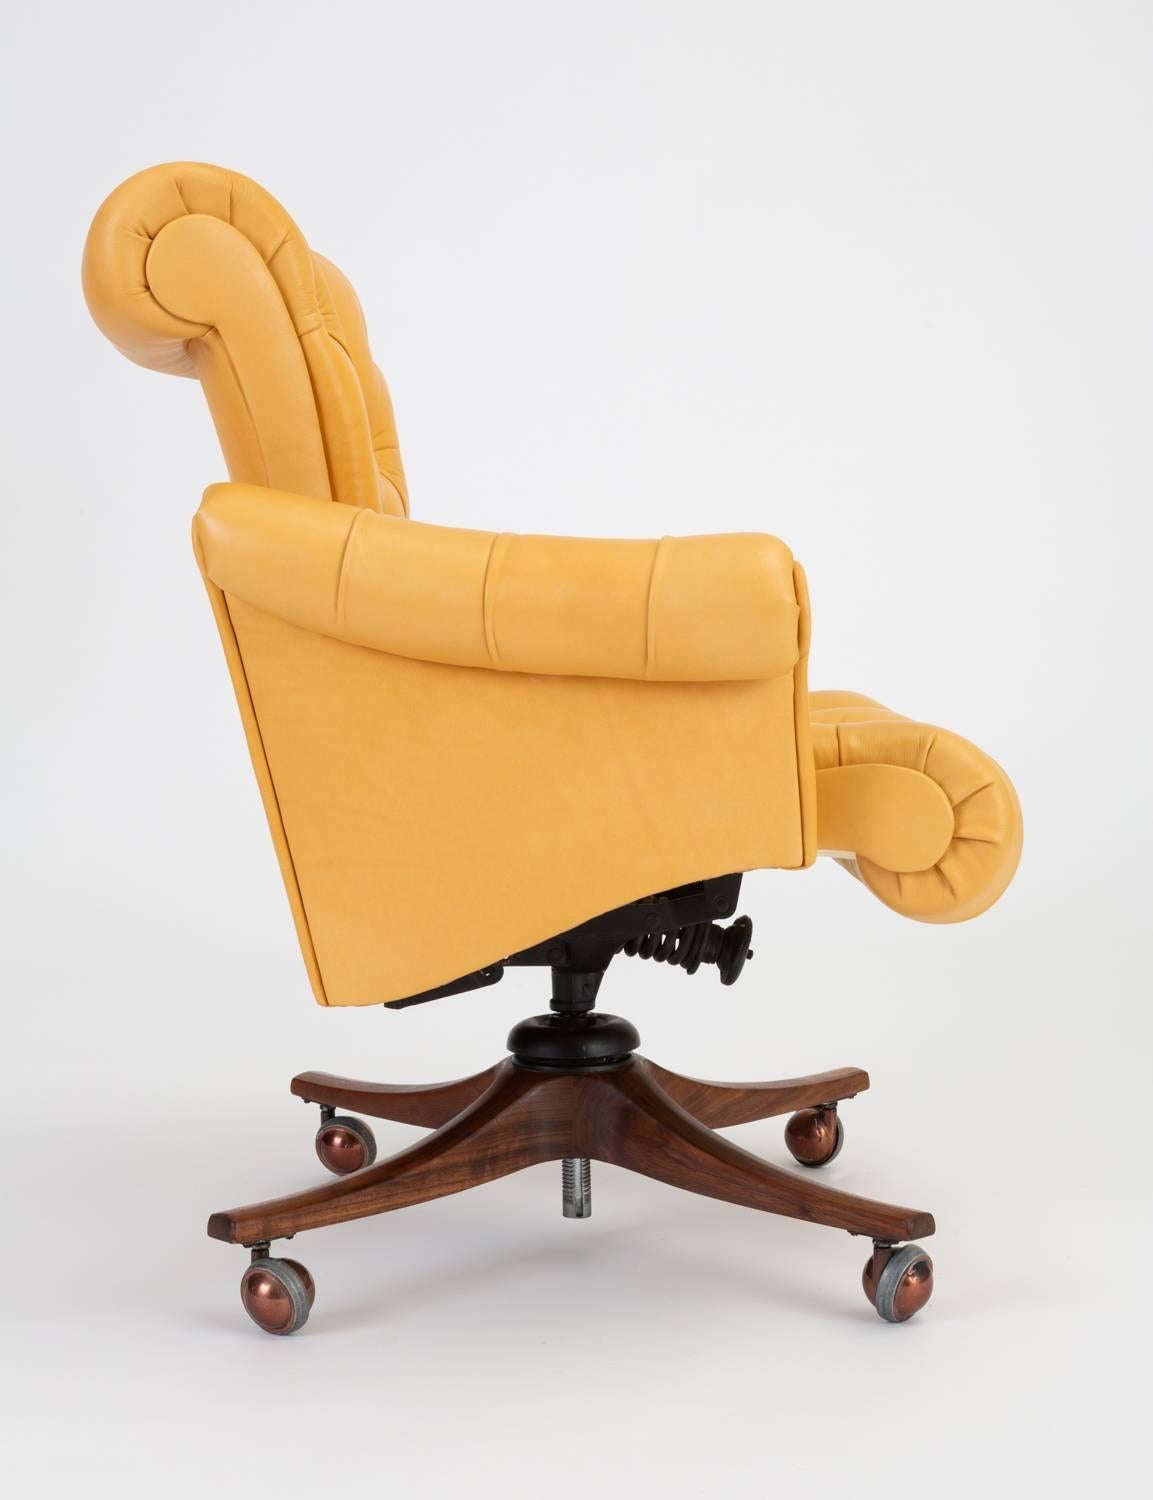 Model 932 “In Clover” Executive Office Chair by Edward Wormley for Dunbar 1